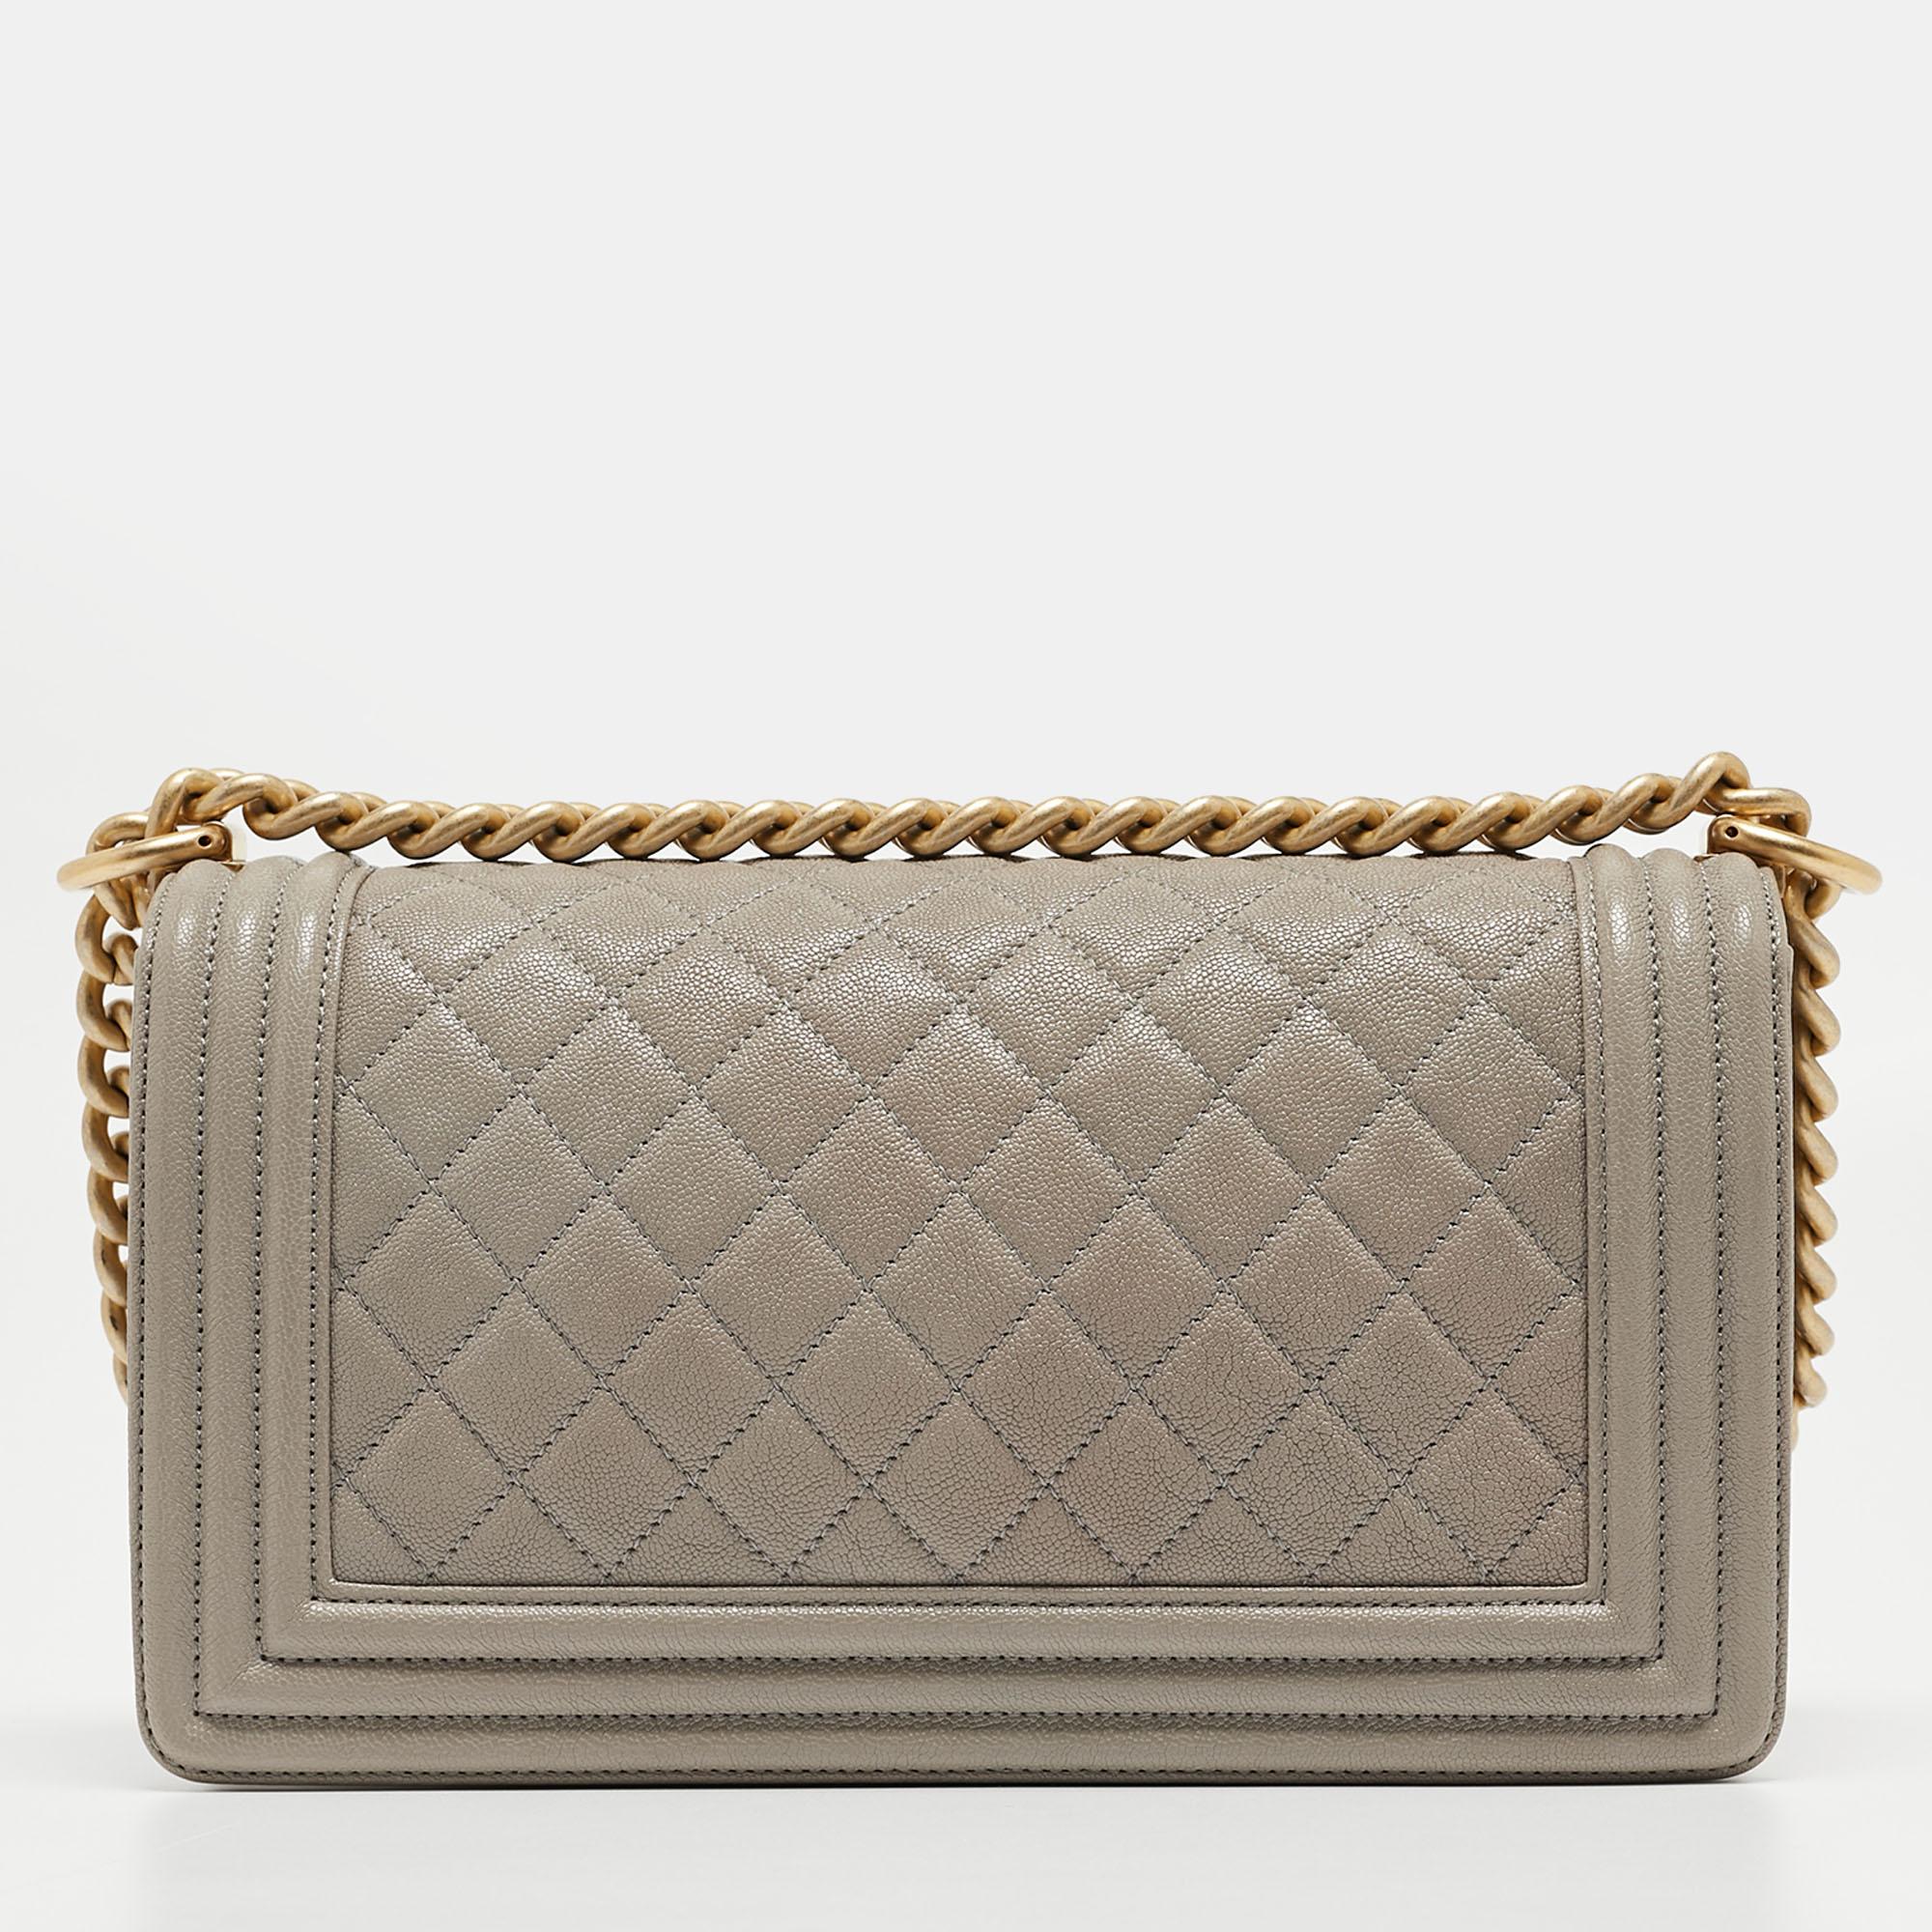 Chanel Grey Quilted Caviar Leather Medium Boy Flap Bag For Sale 11